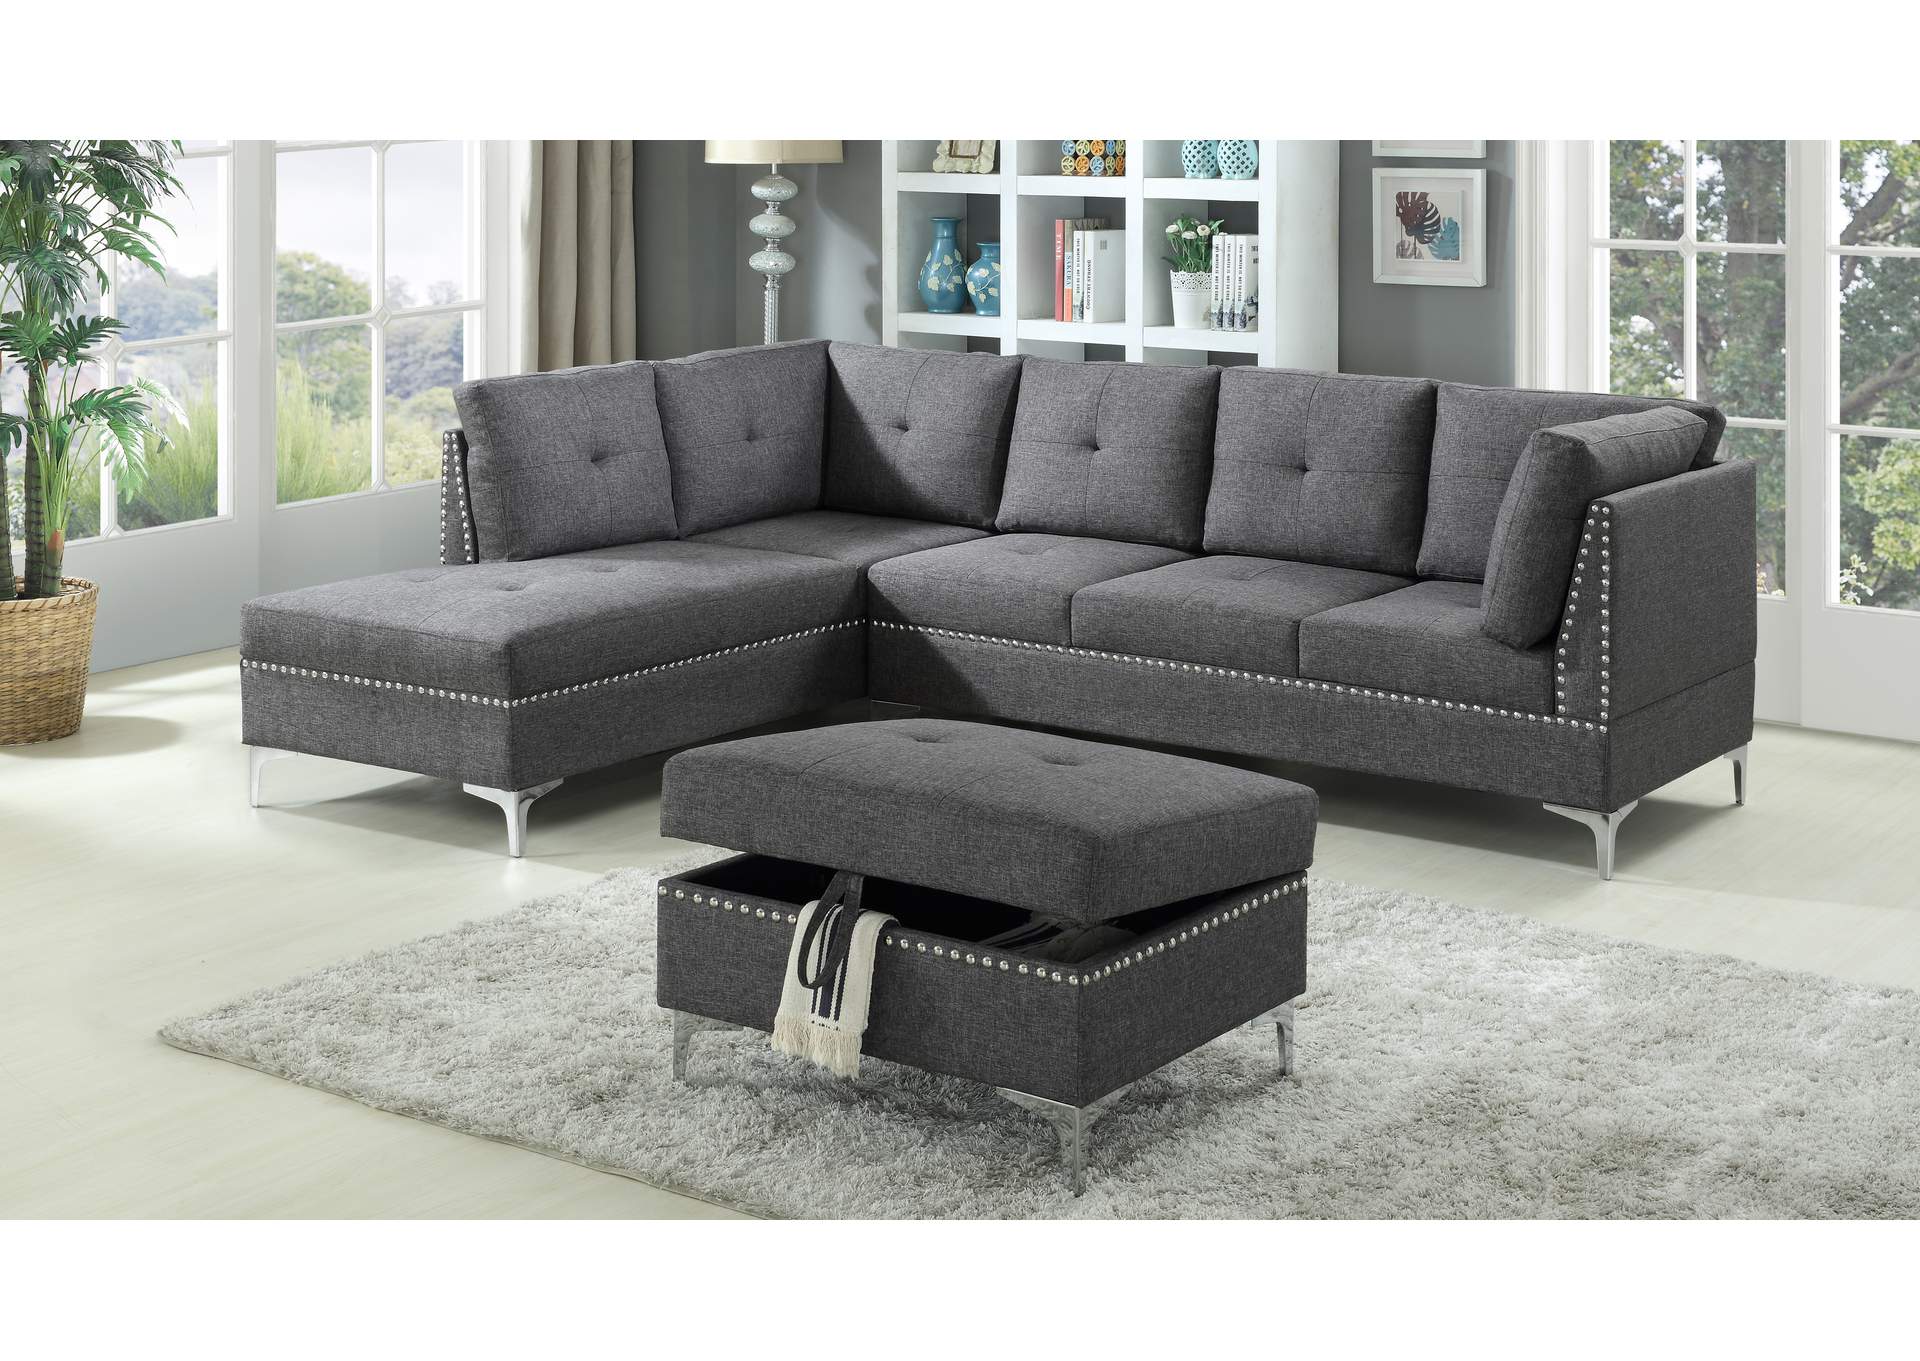 U5034 Grey Sectional Chaise,Global Trading